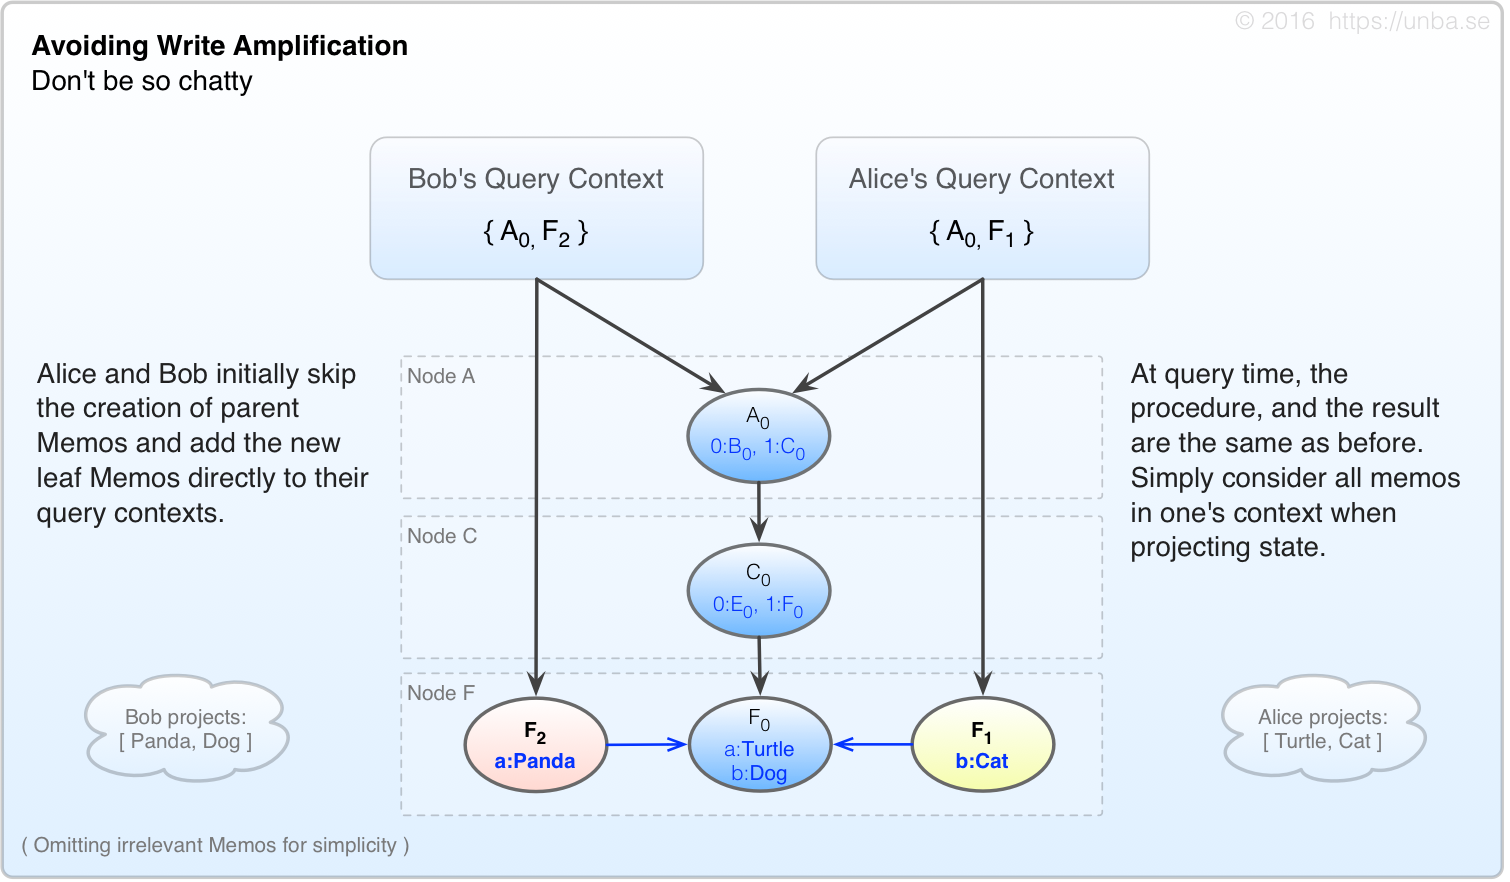 Alice and Bob initially skip the creation of parent Memos and add the new leaf Memos directly to their query contexts. At query time, the procedure and the result are the same as before: Simply consider all Memos in one's context when projecting state.